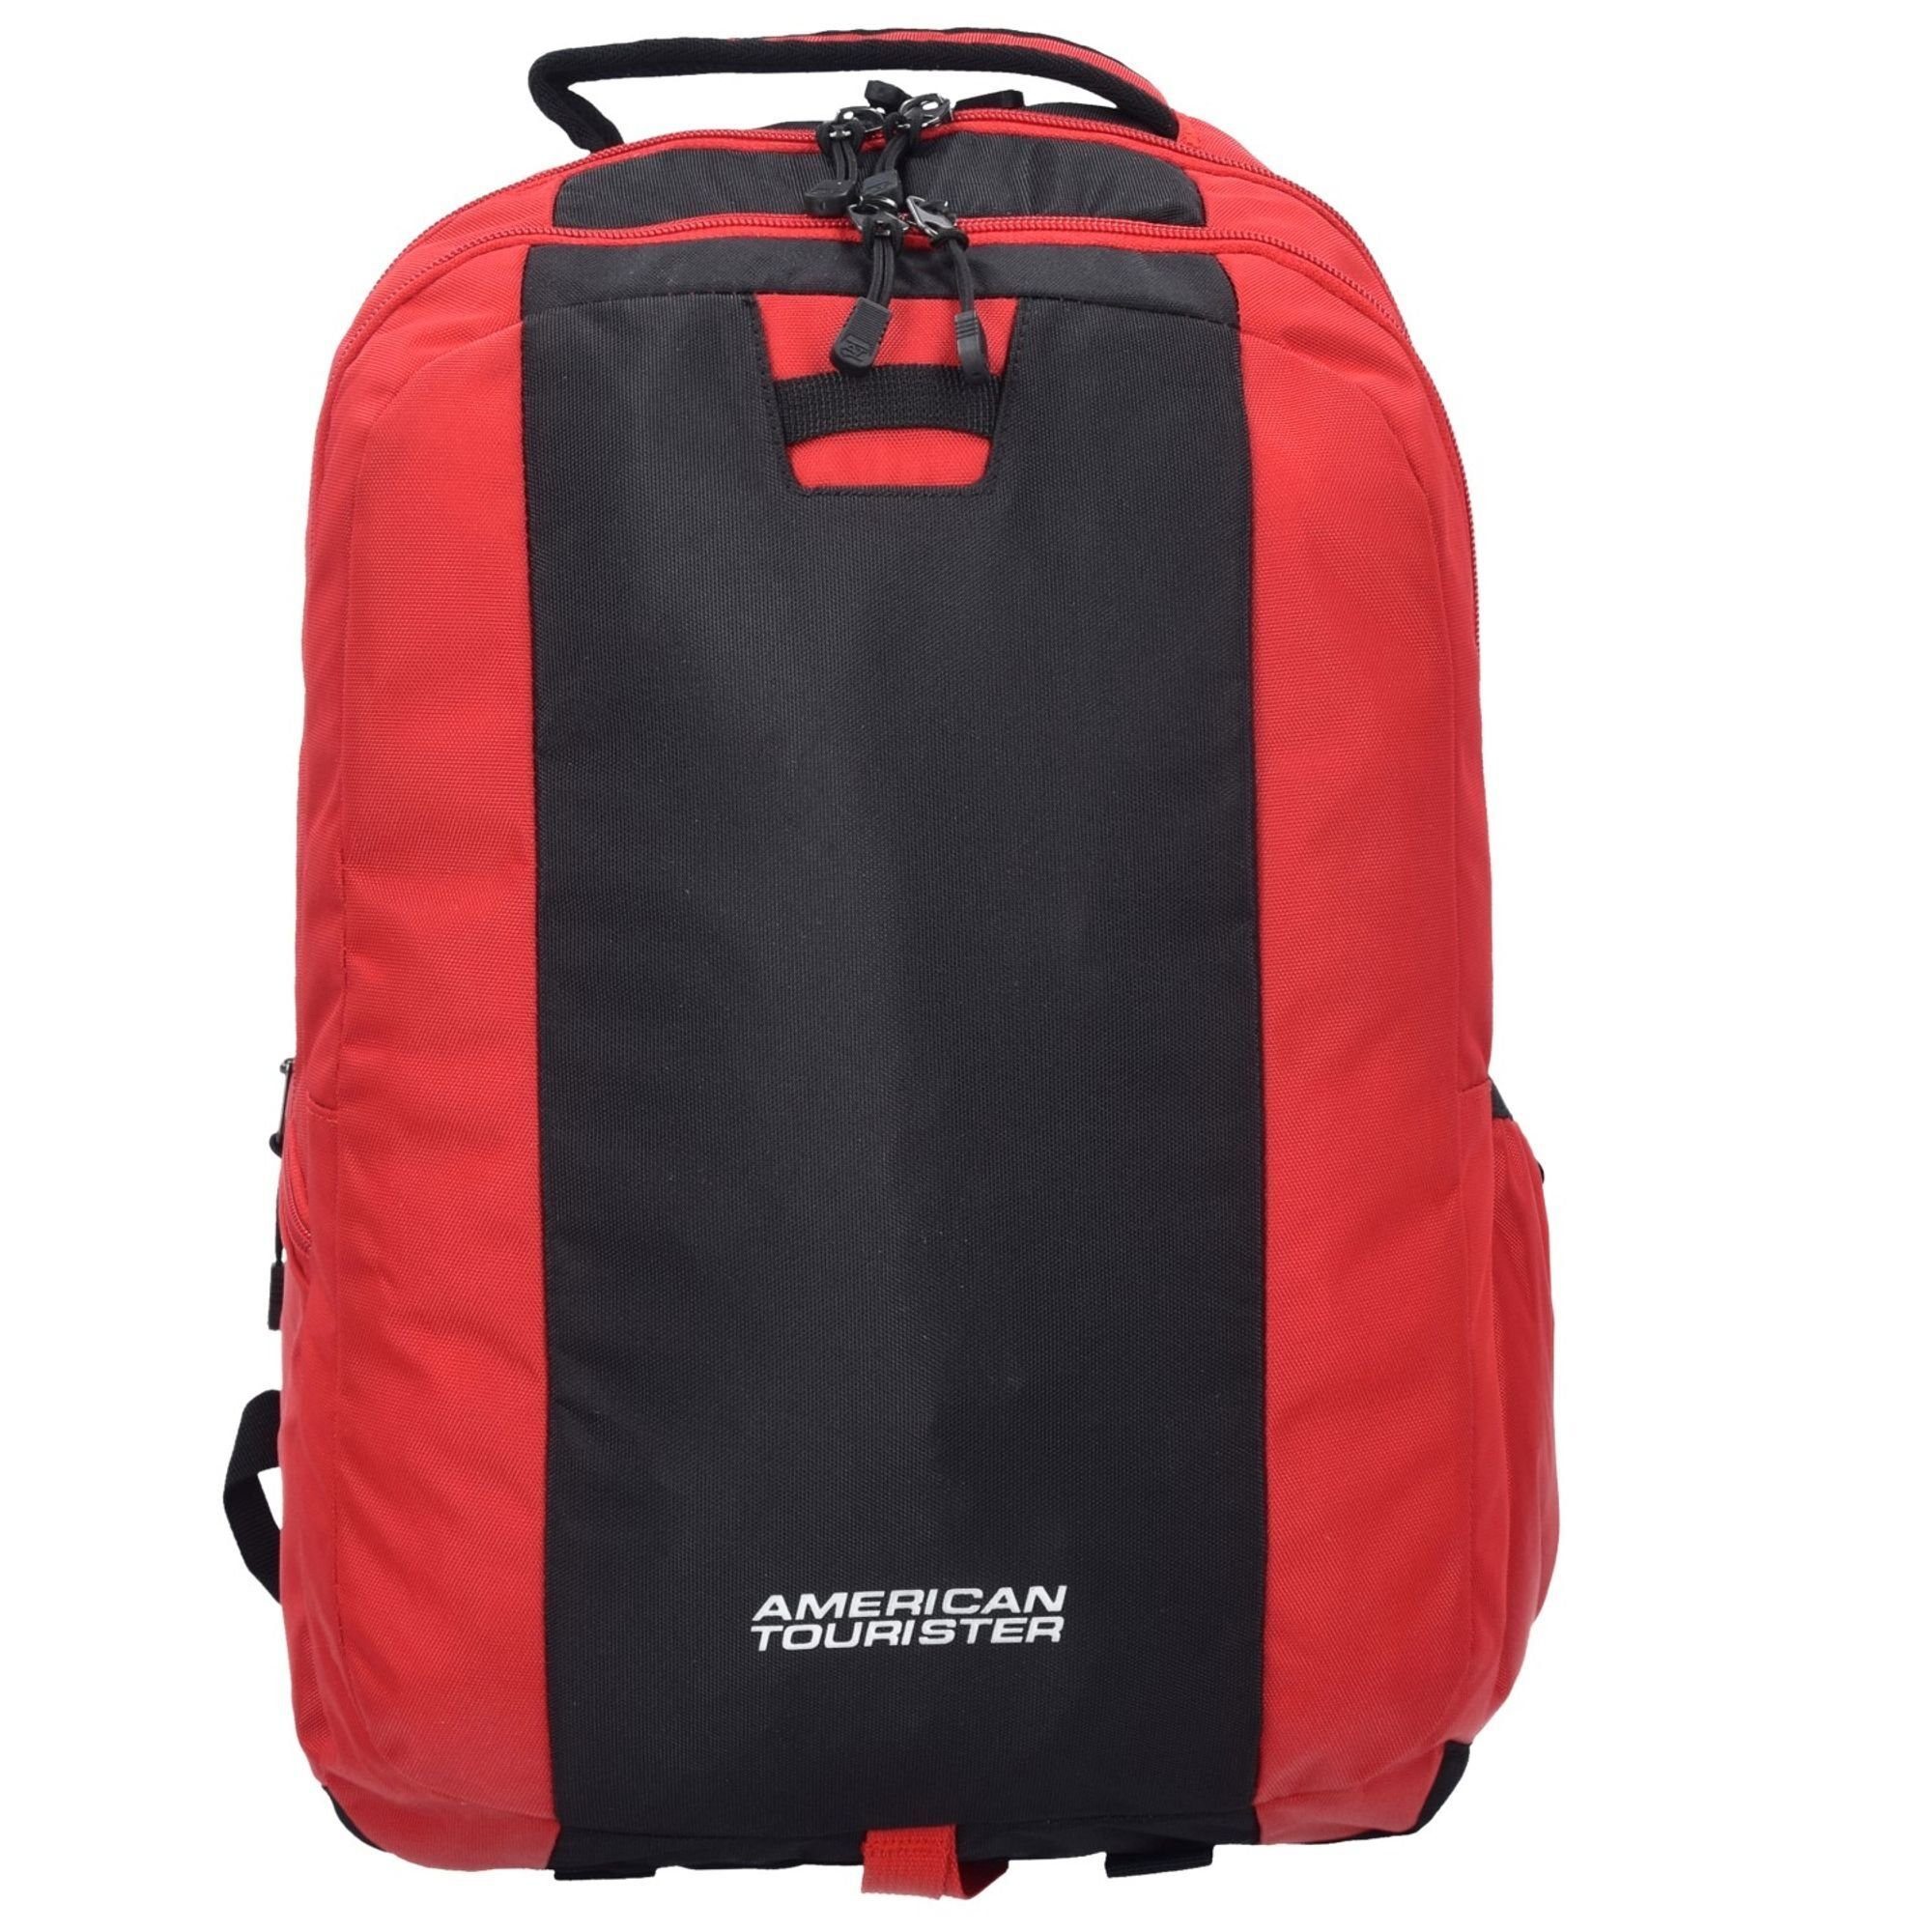 American Tourister® Laptoprucksack Urban Groove, Polyester red